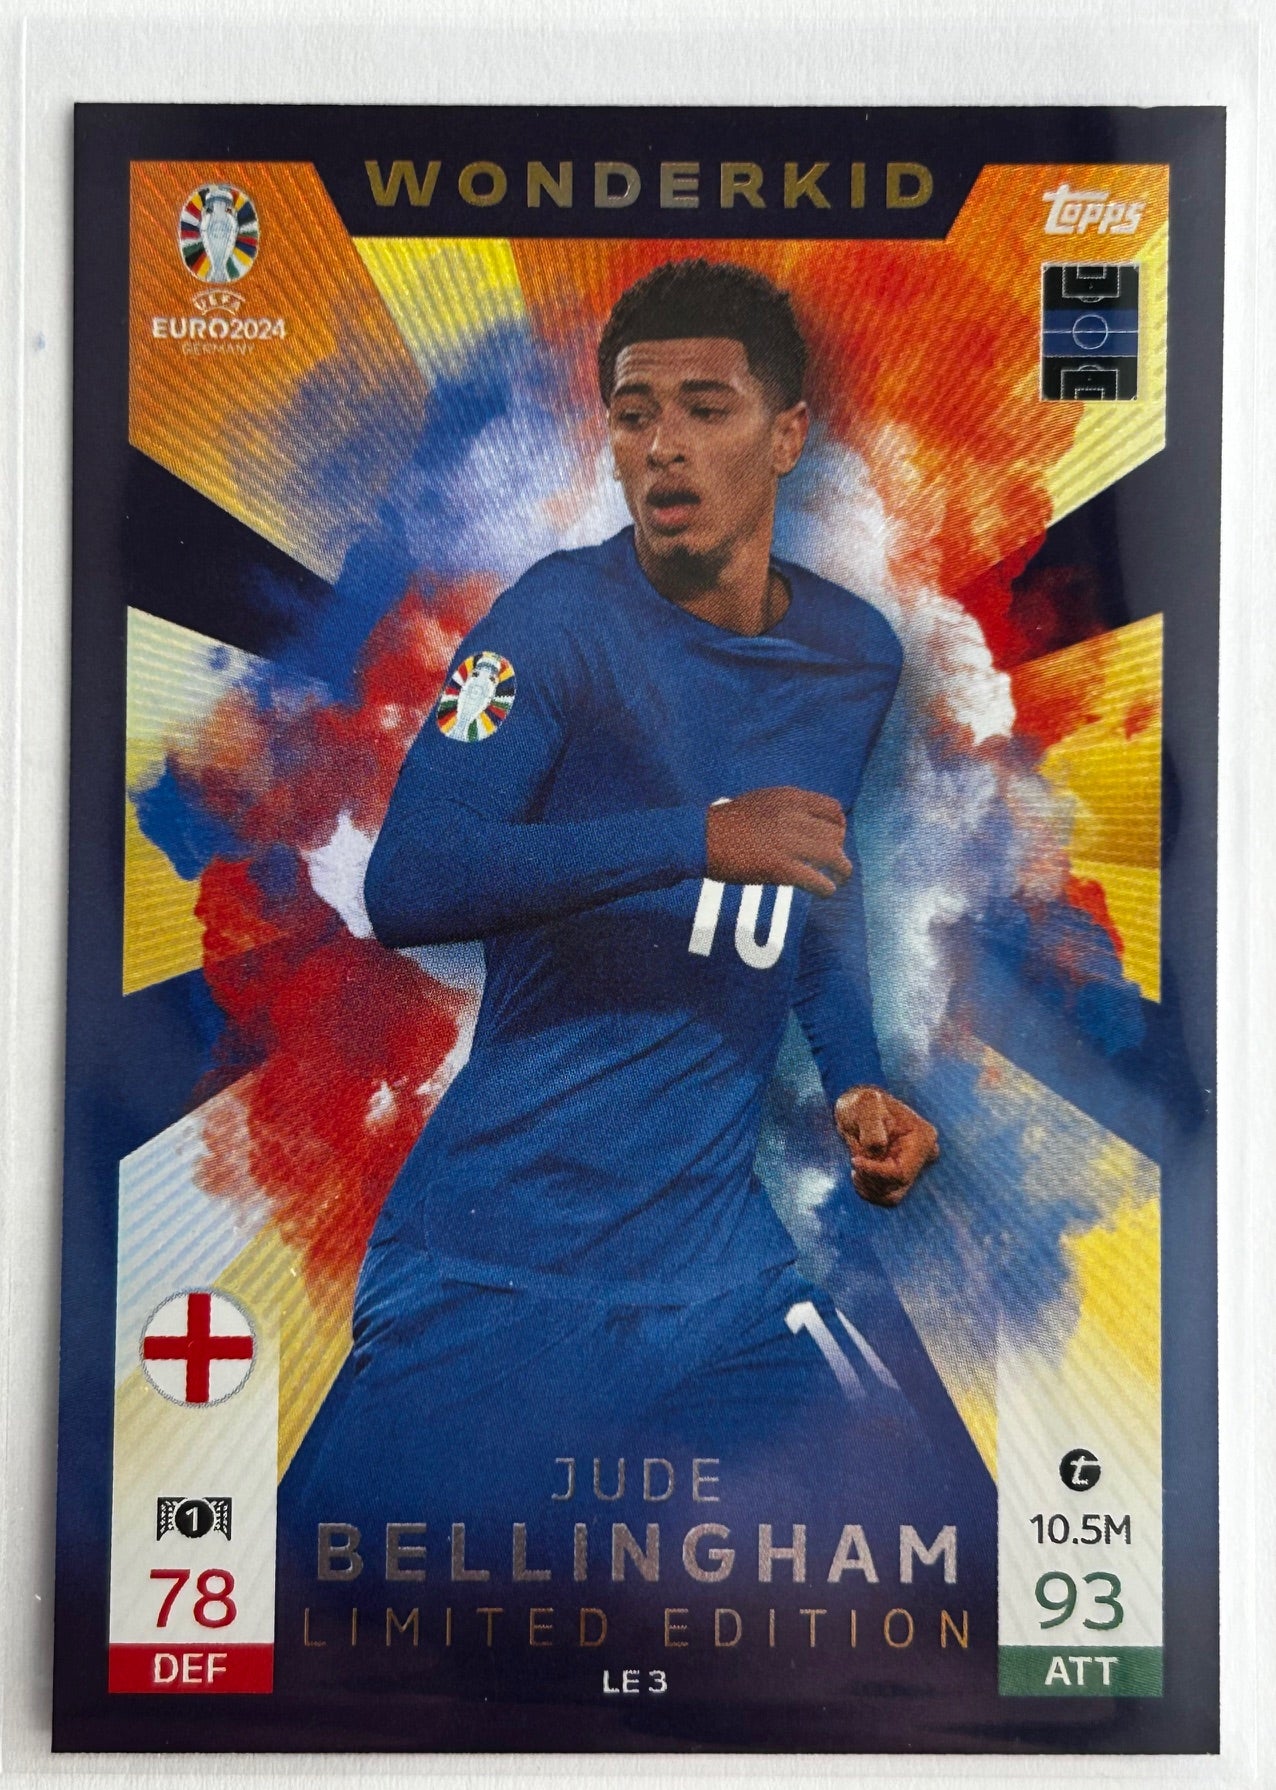 Topps Match Attax UEFA EURO 2024 - BELLINGHAM (ENGLAND) Wonderkid Limited Edition LE3